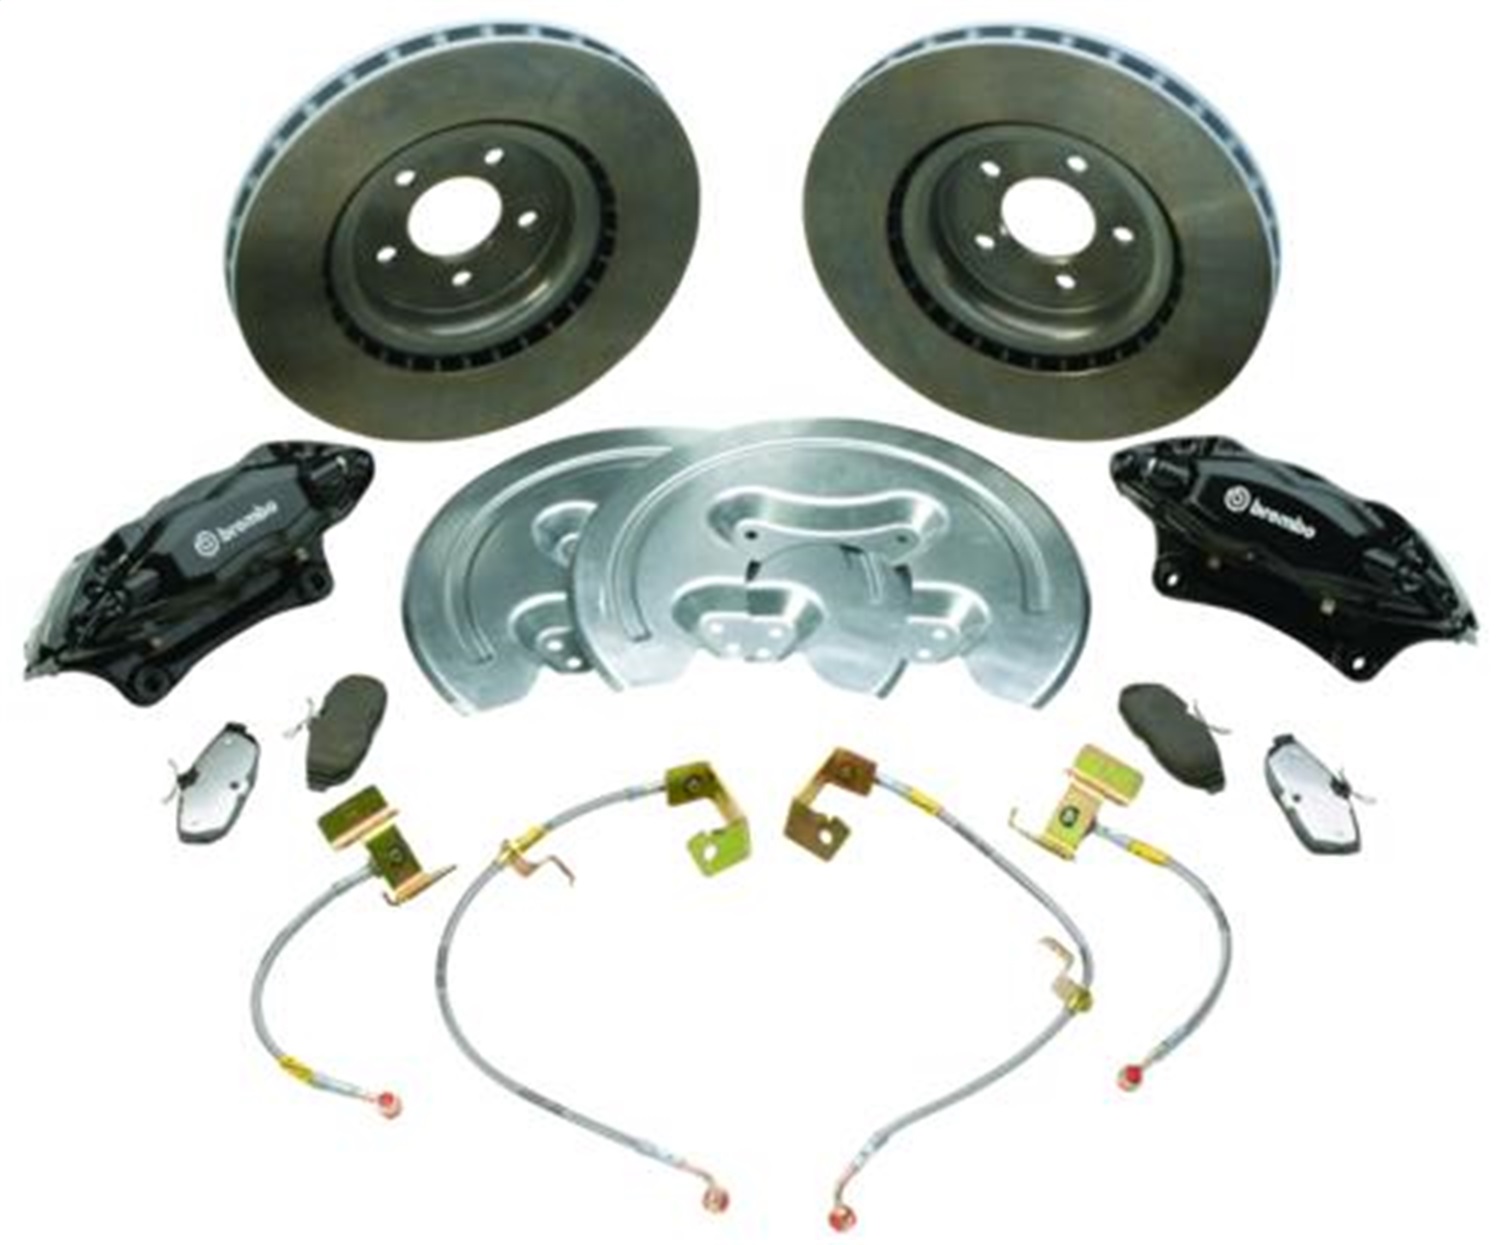 Ford Performance Parts M-2300-S Disc Brake Upgrade Kit Fits 05-14 Mustang